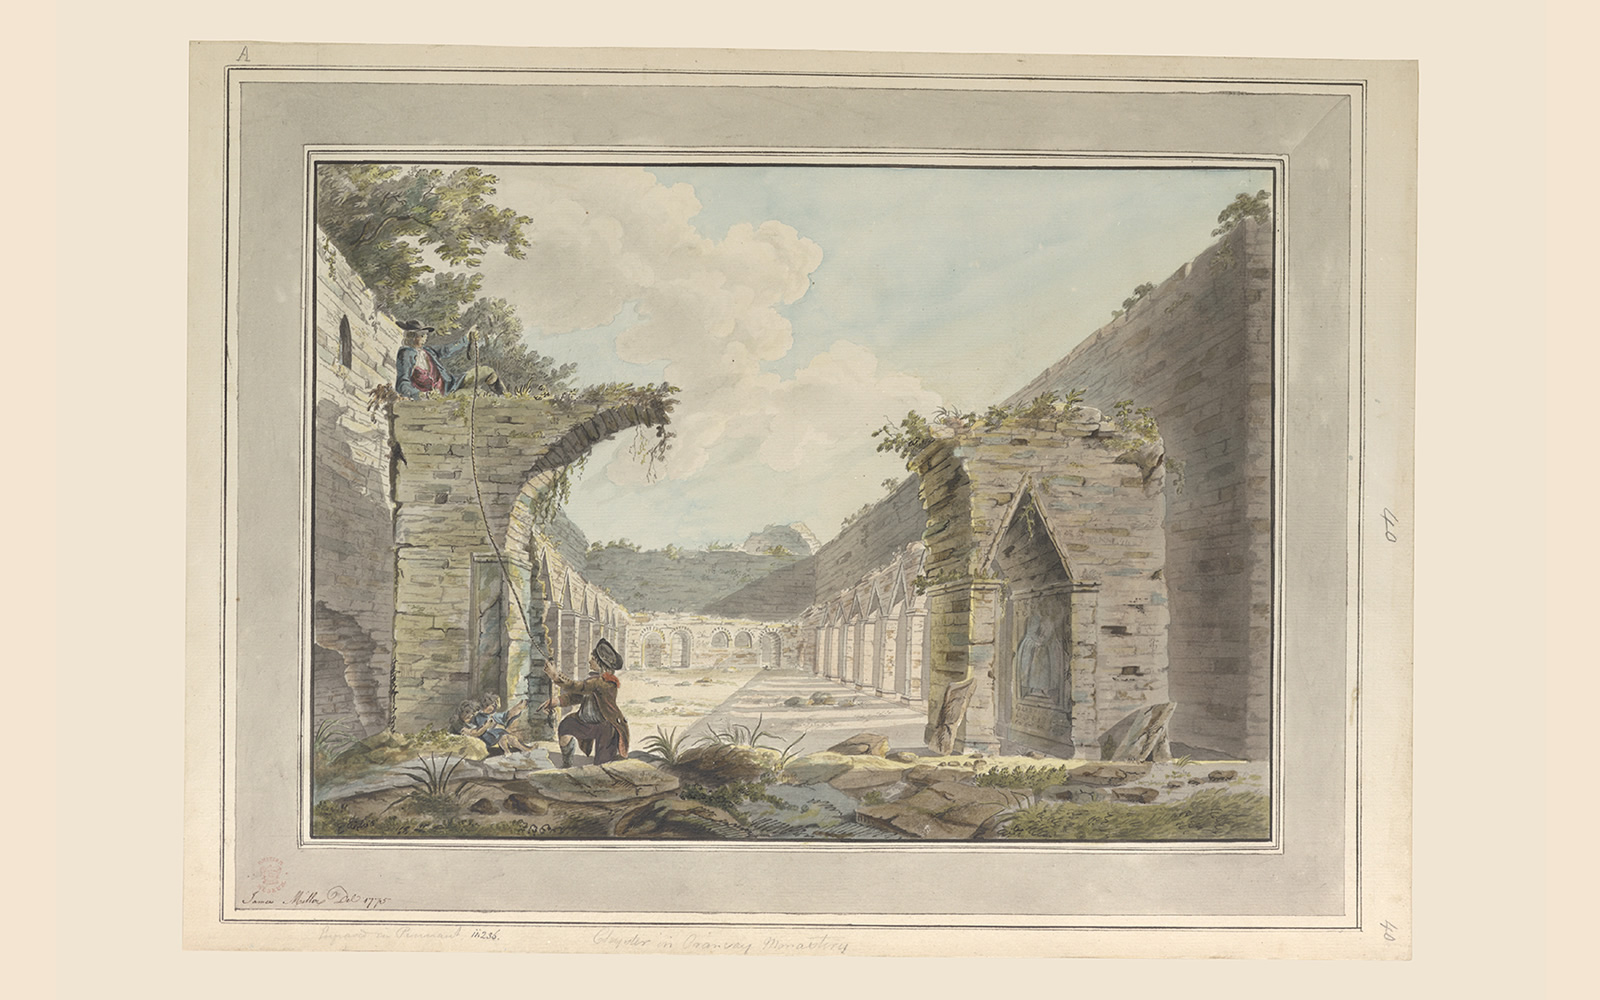 James Miller, 'Cloyster in Oronsay Monastery' (British Library)